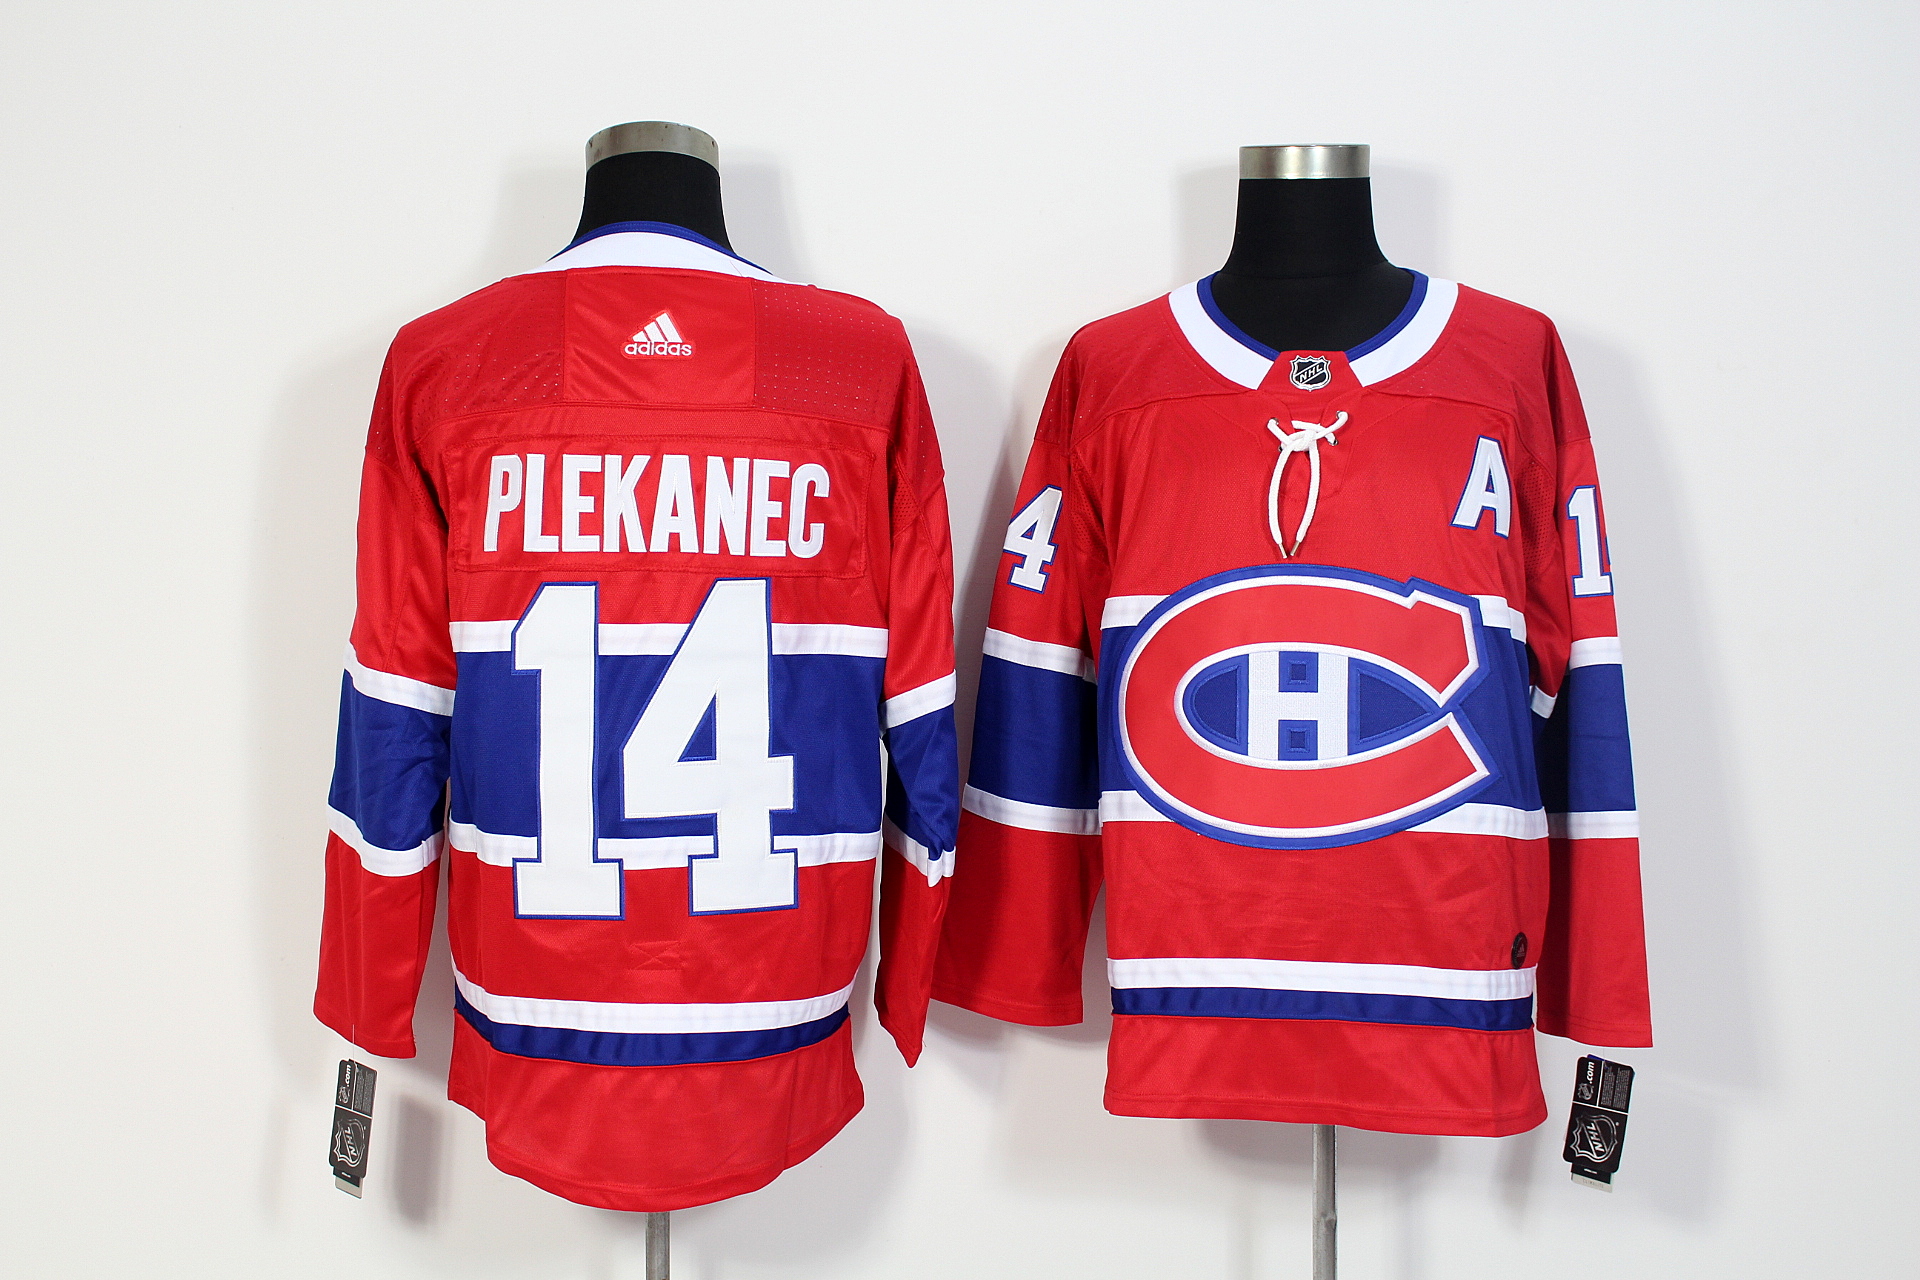 Men's Adidas Montreal Canadiens #14 Tomas Plekanec Red Stitched NHL Jersey